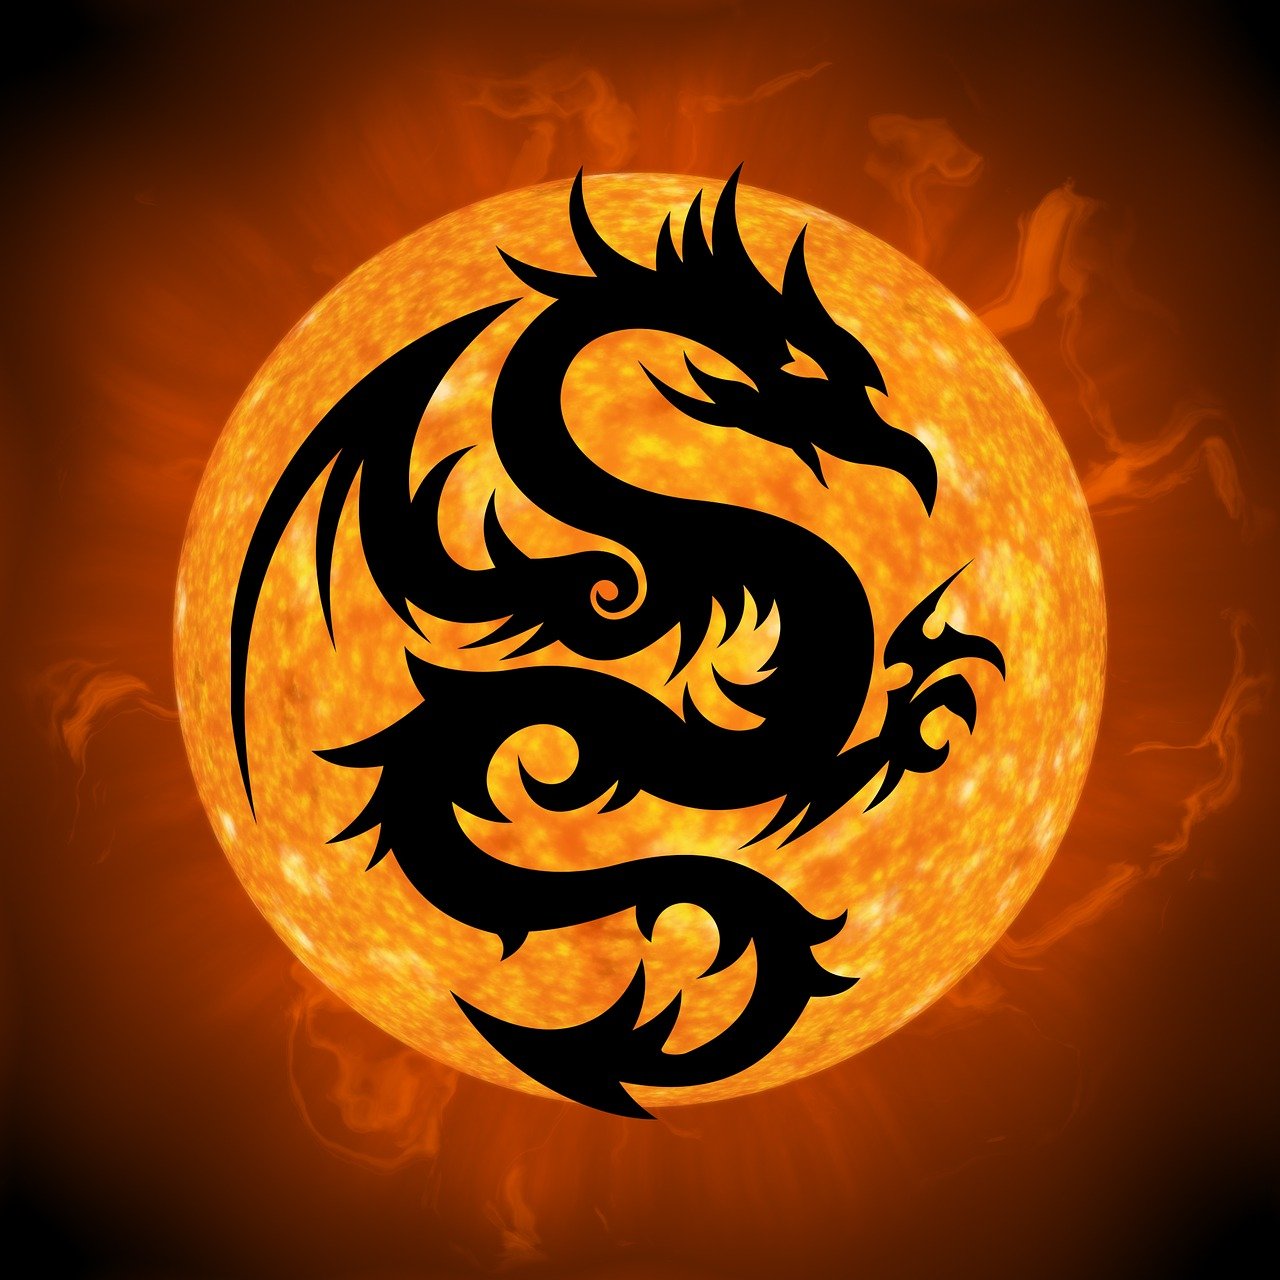 a silhouette of a dragon in front of a full moon, inspired by Xie Sun, glowing hot sun, the order of the burning shadow, solar flare, black orb of fire